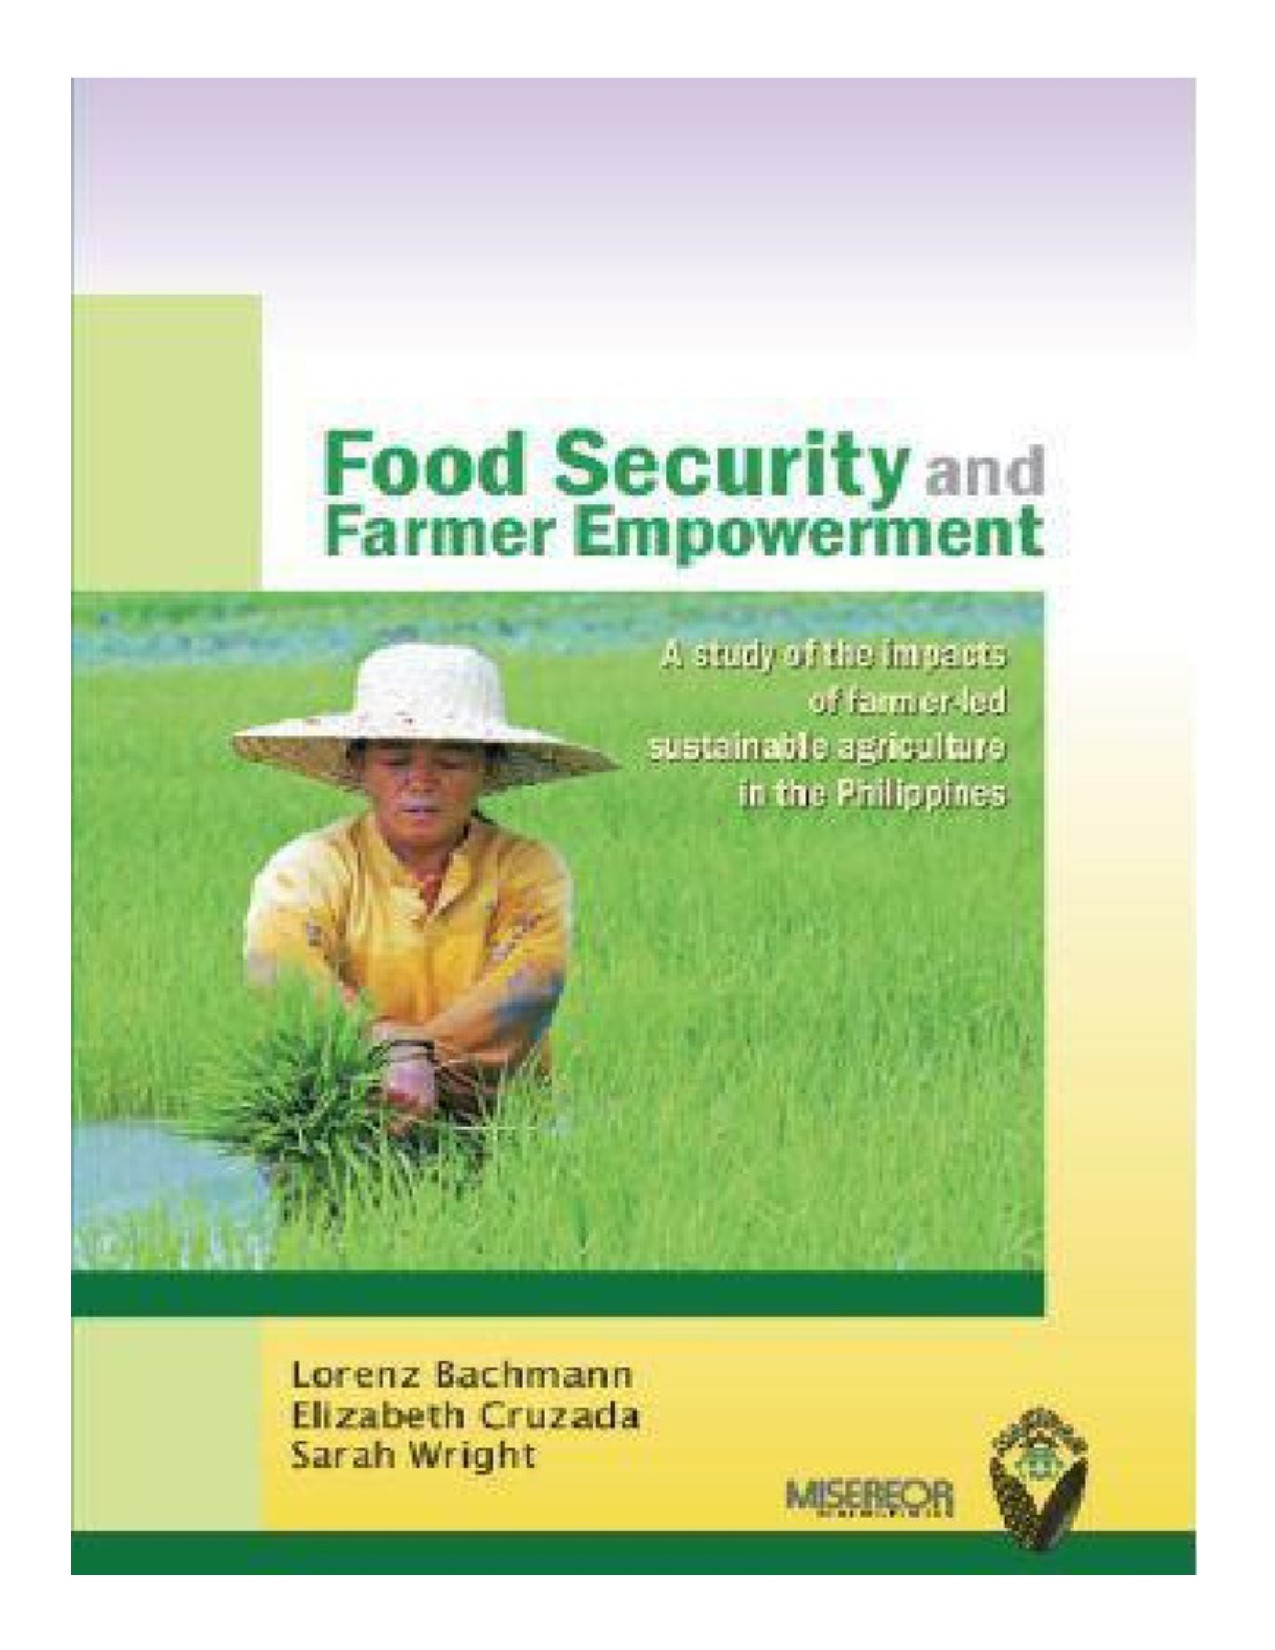 Food security and farmer empowerment a study of the impacts of farmer-led sustainable agriculture in the Philippines